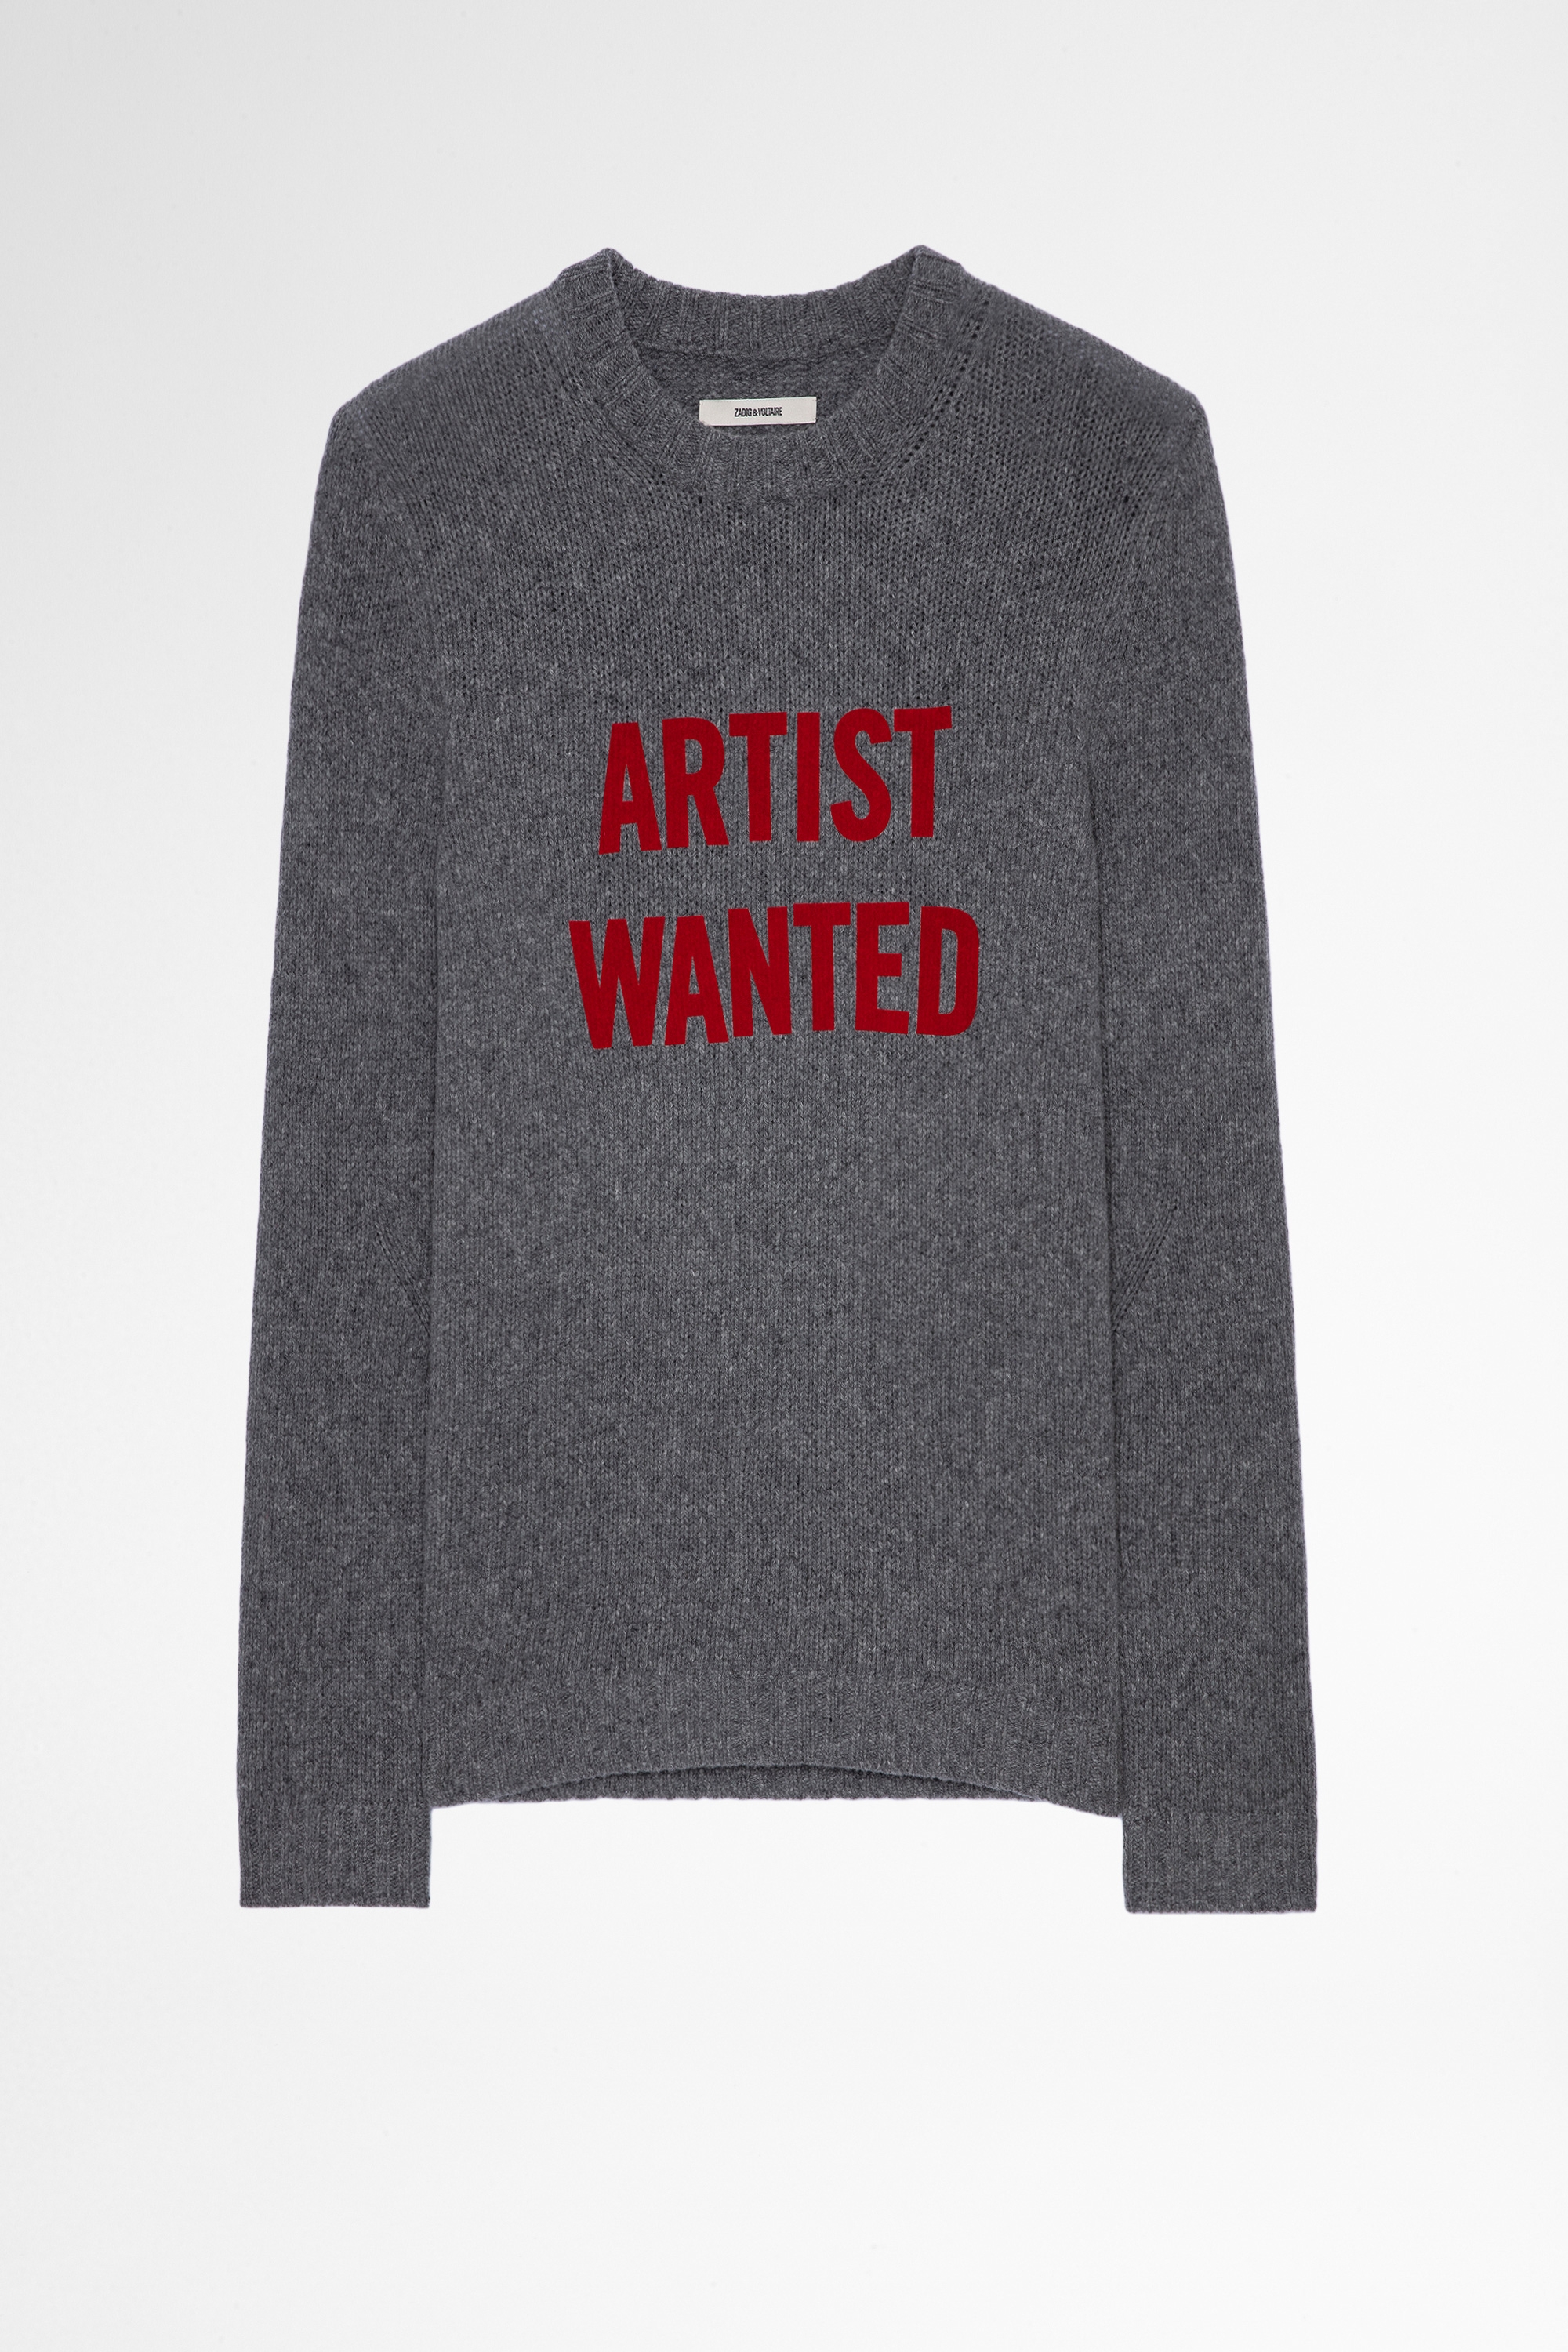 Kennedy Artist Wanted Sweater